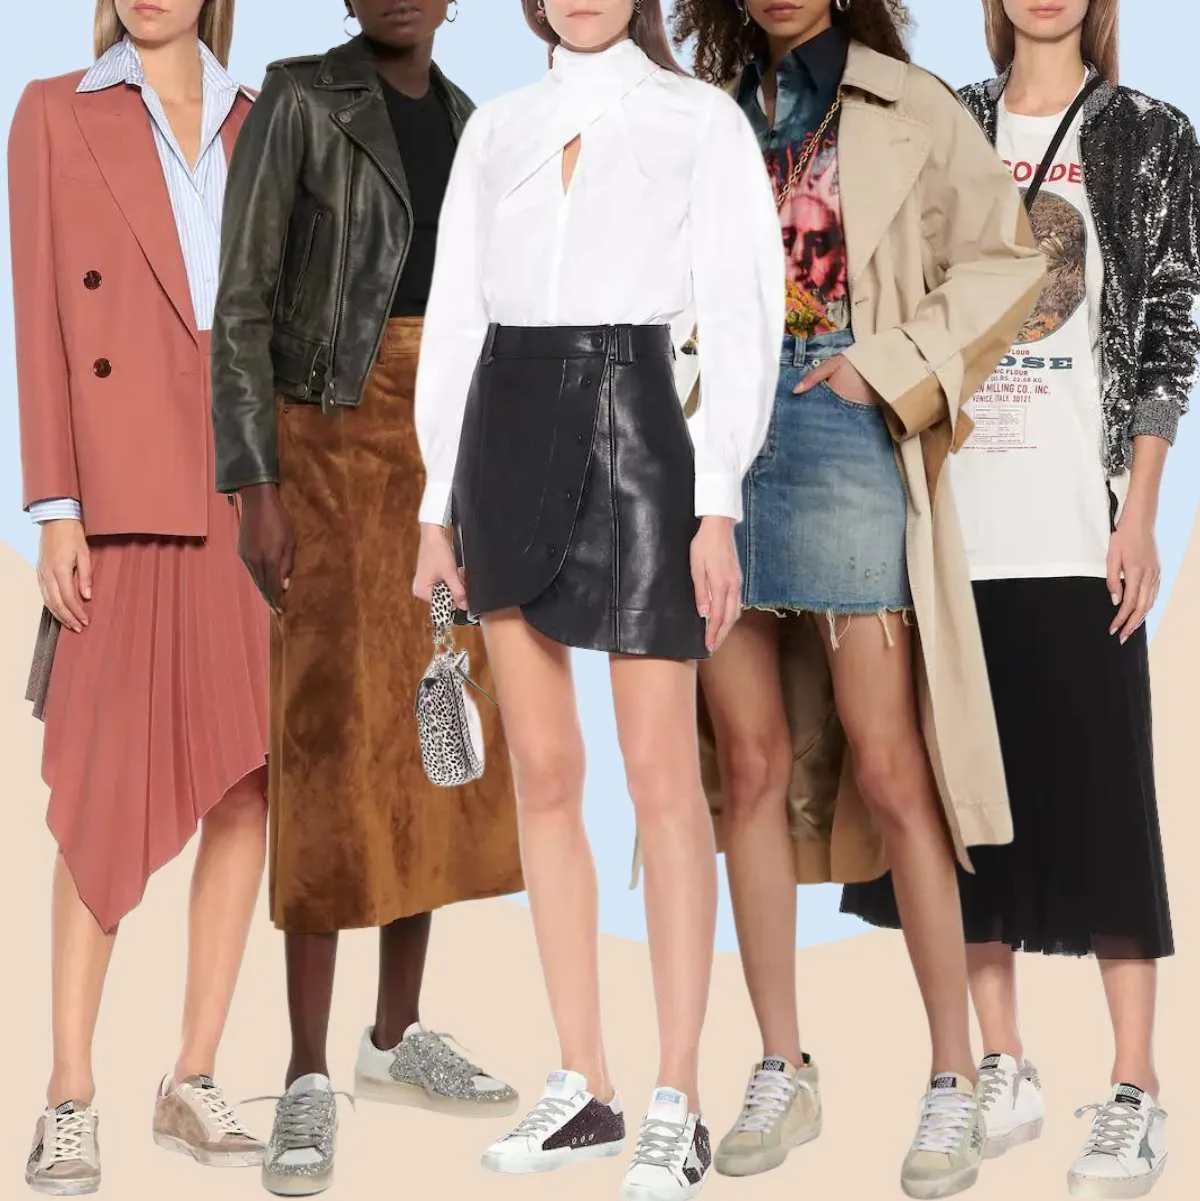 Collage of 5 women wearing different golden goose outfits with skirts.